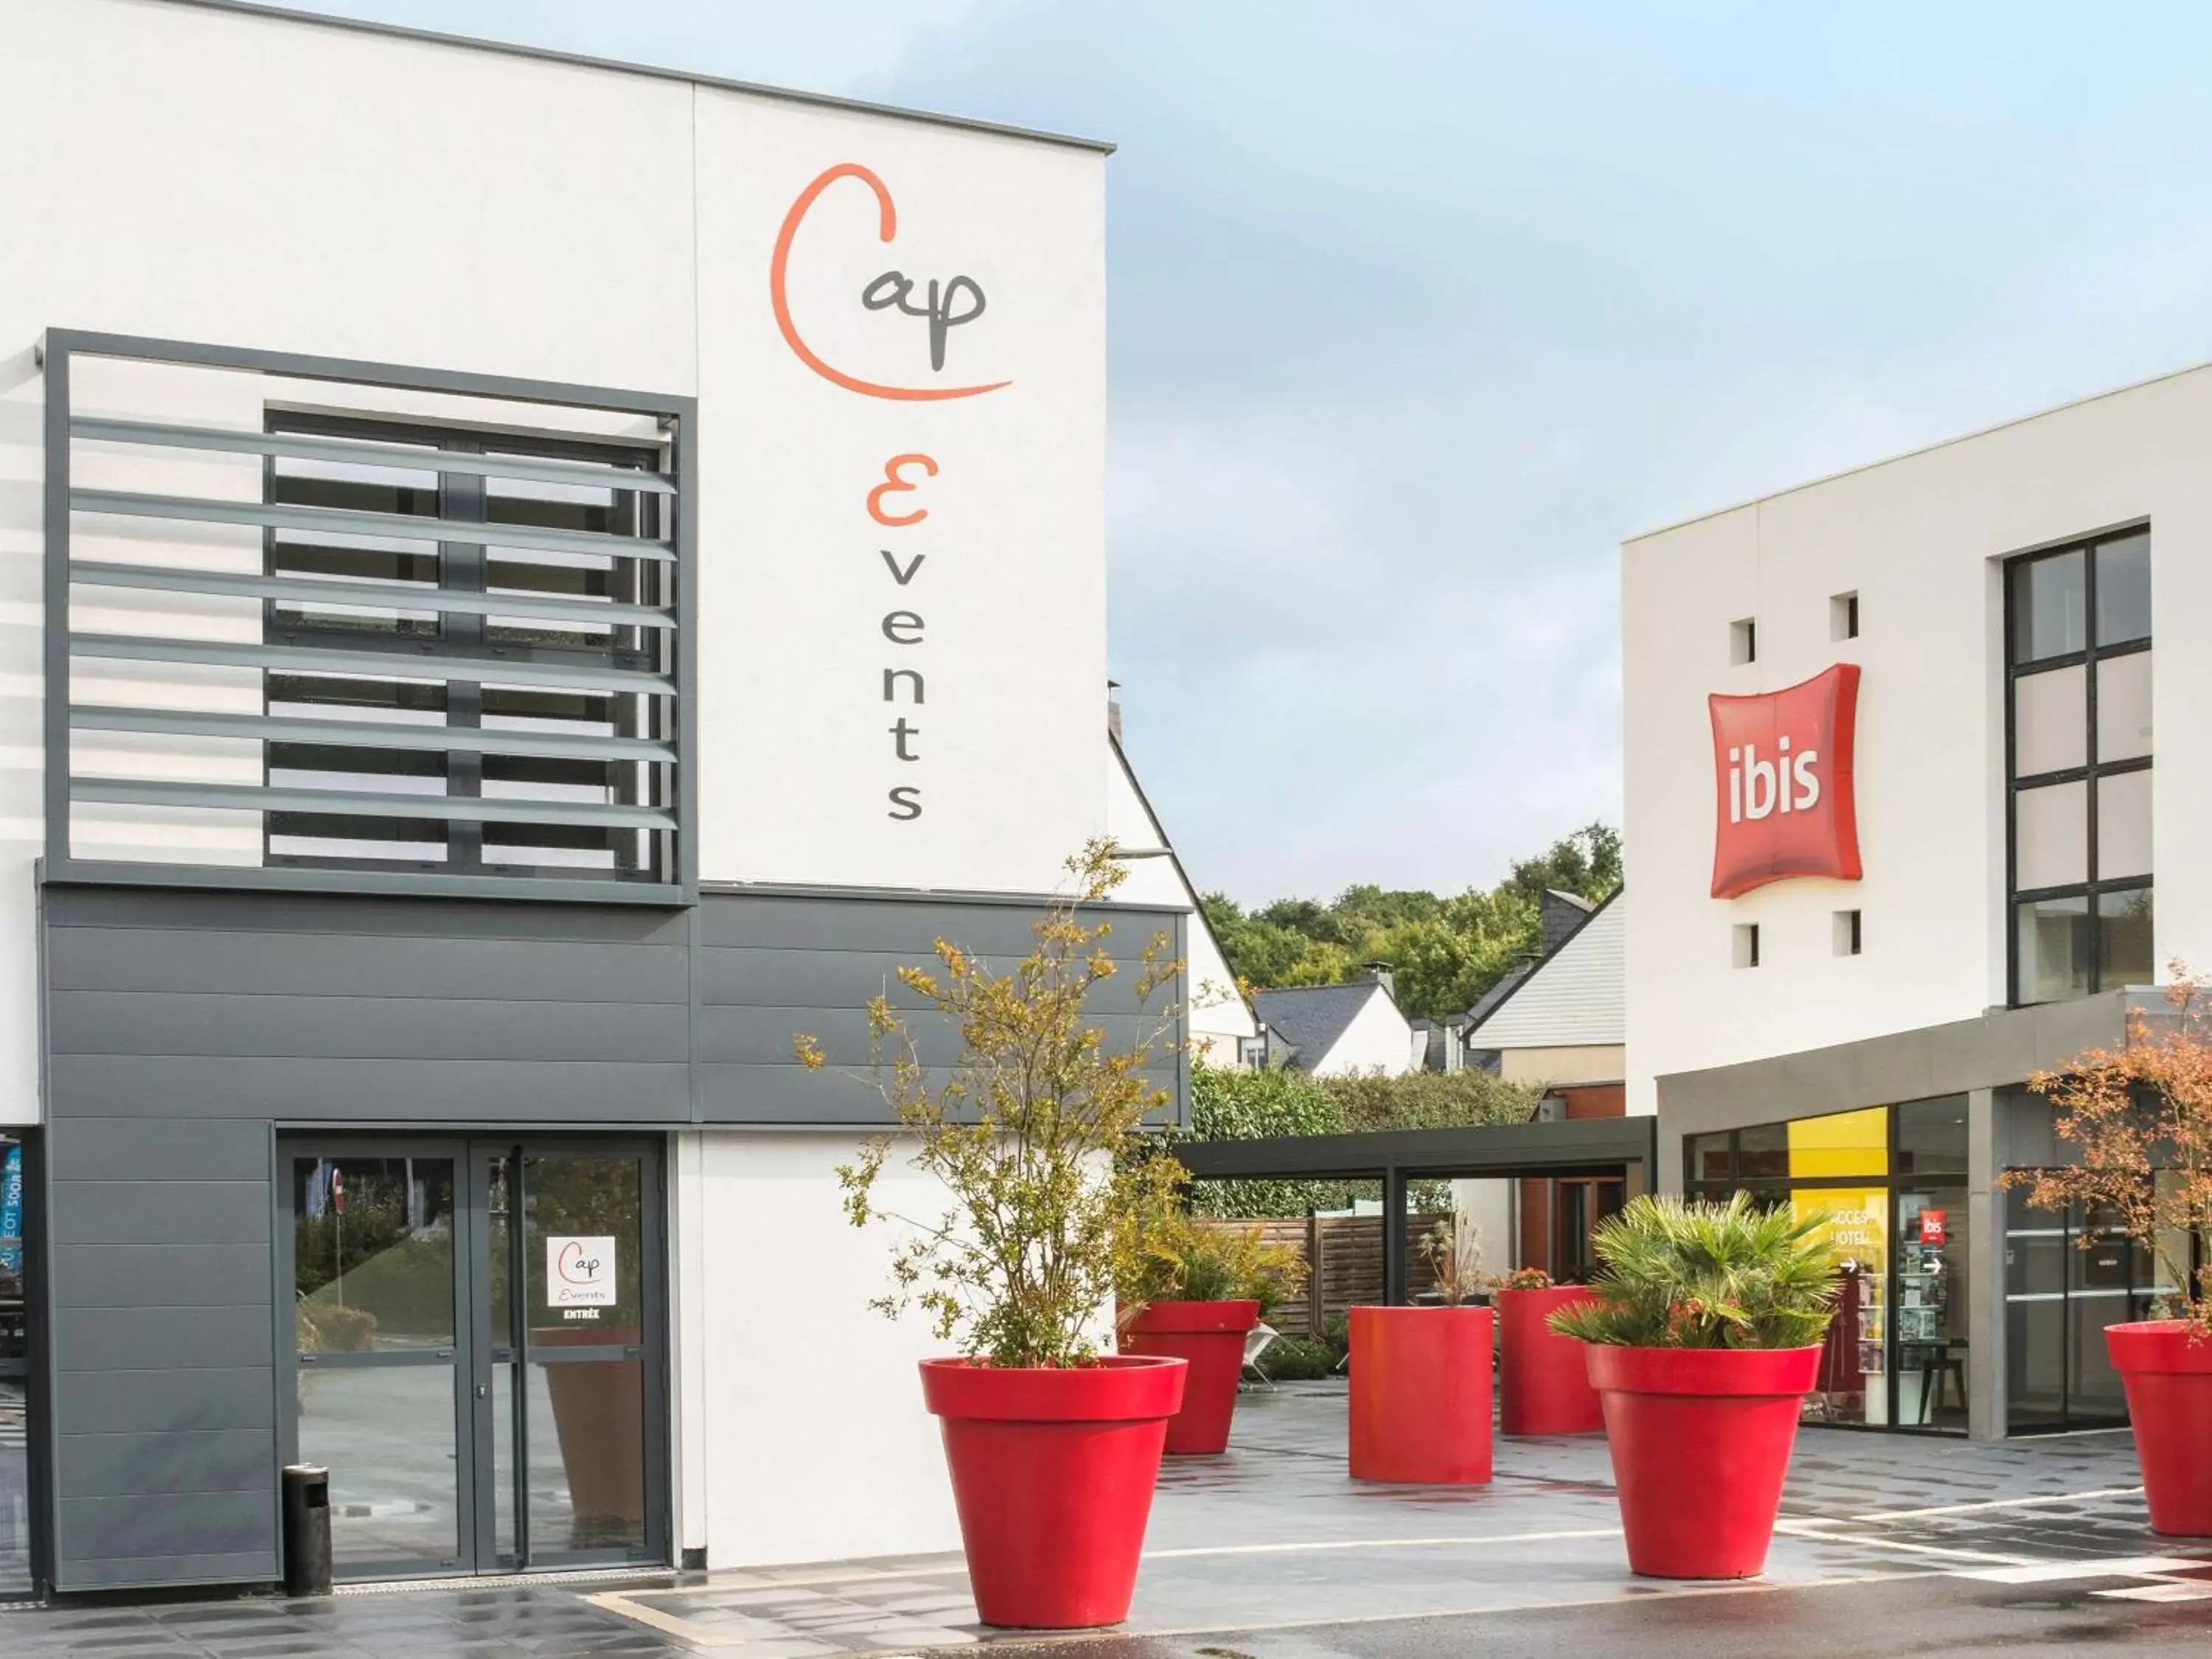 On site, Property Building in ibis Rennes Beaulieu